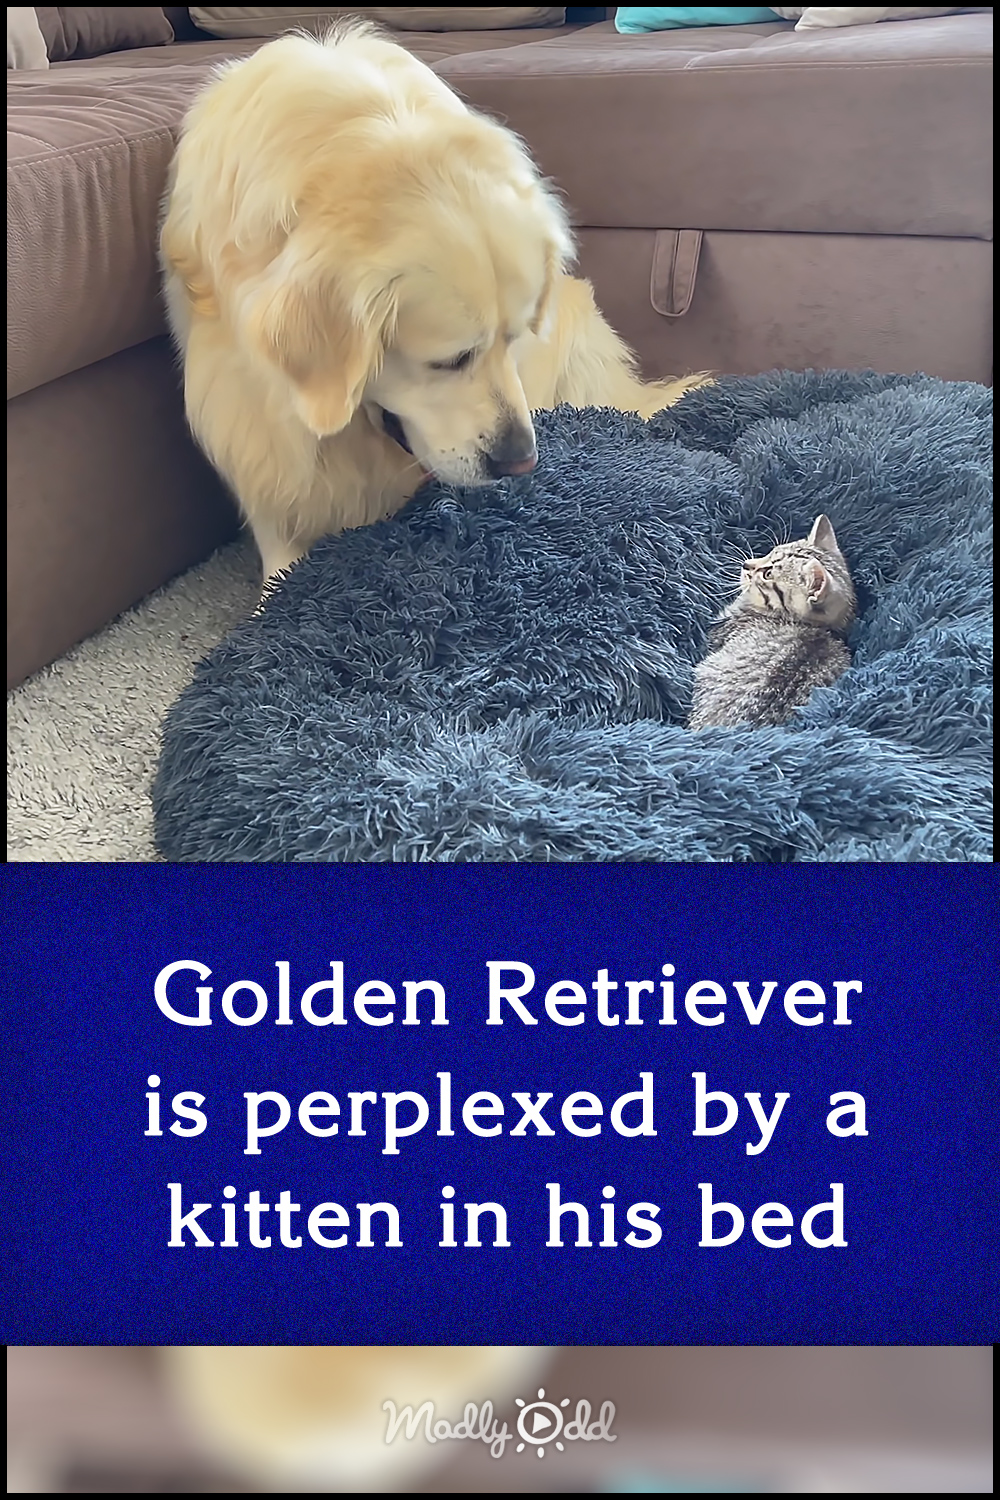 Golden Retriever is perplexed by a kitten in his bed